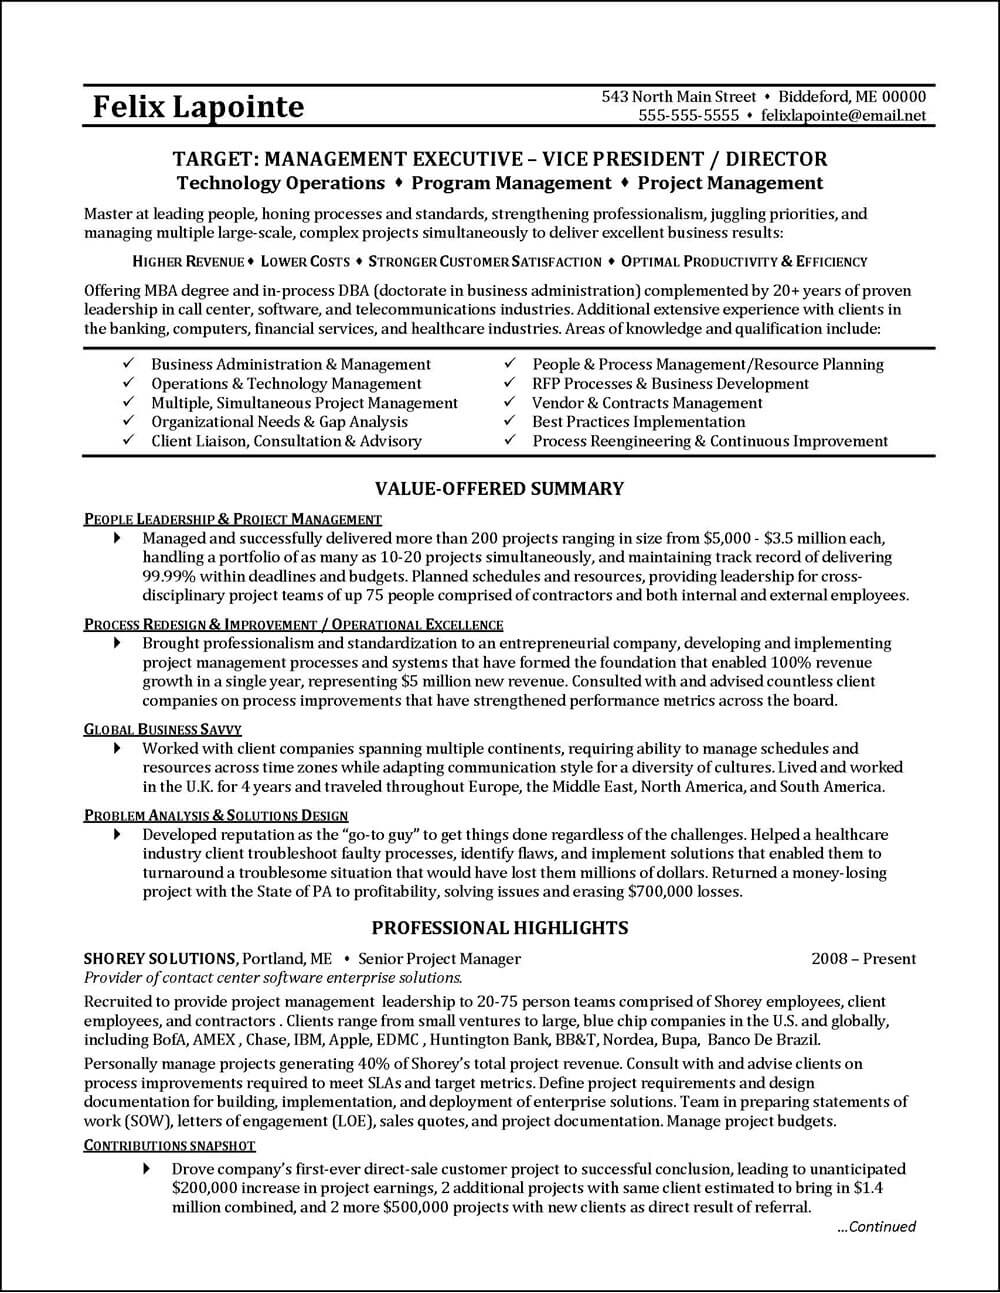 Example Of A Resume Program Manager Resume Example Page 1 example of a resume|wikiresume.com